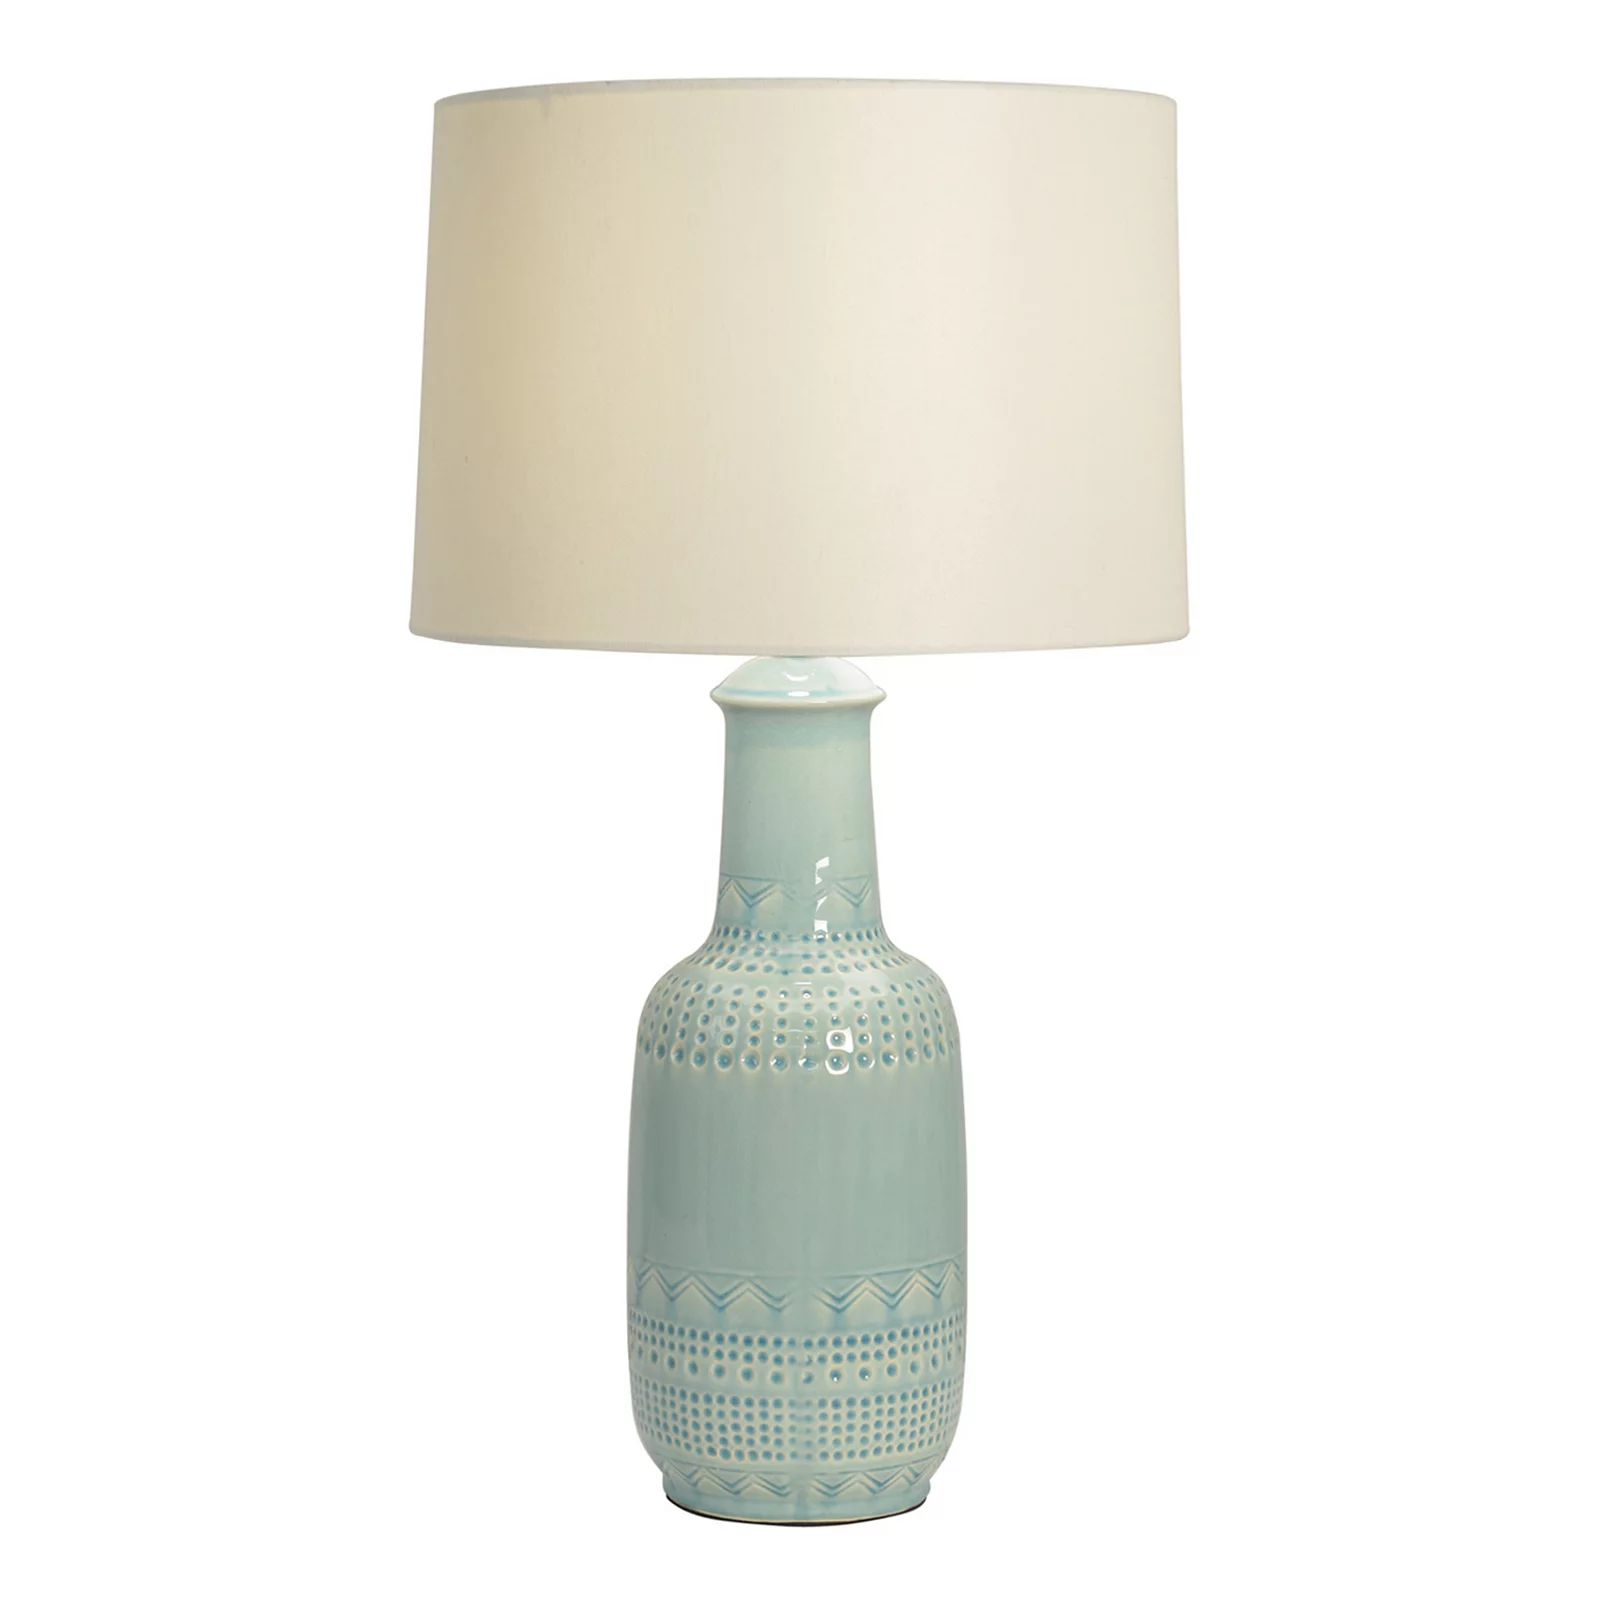 Decor Therapy Patterned Ceramic Table Lamp, Green | Kohl's